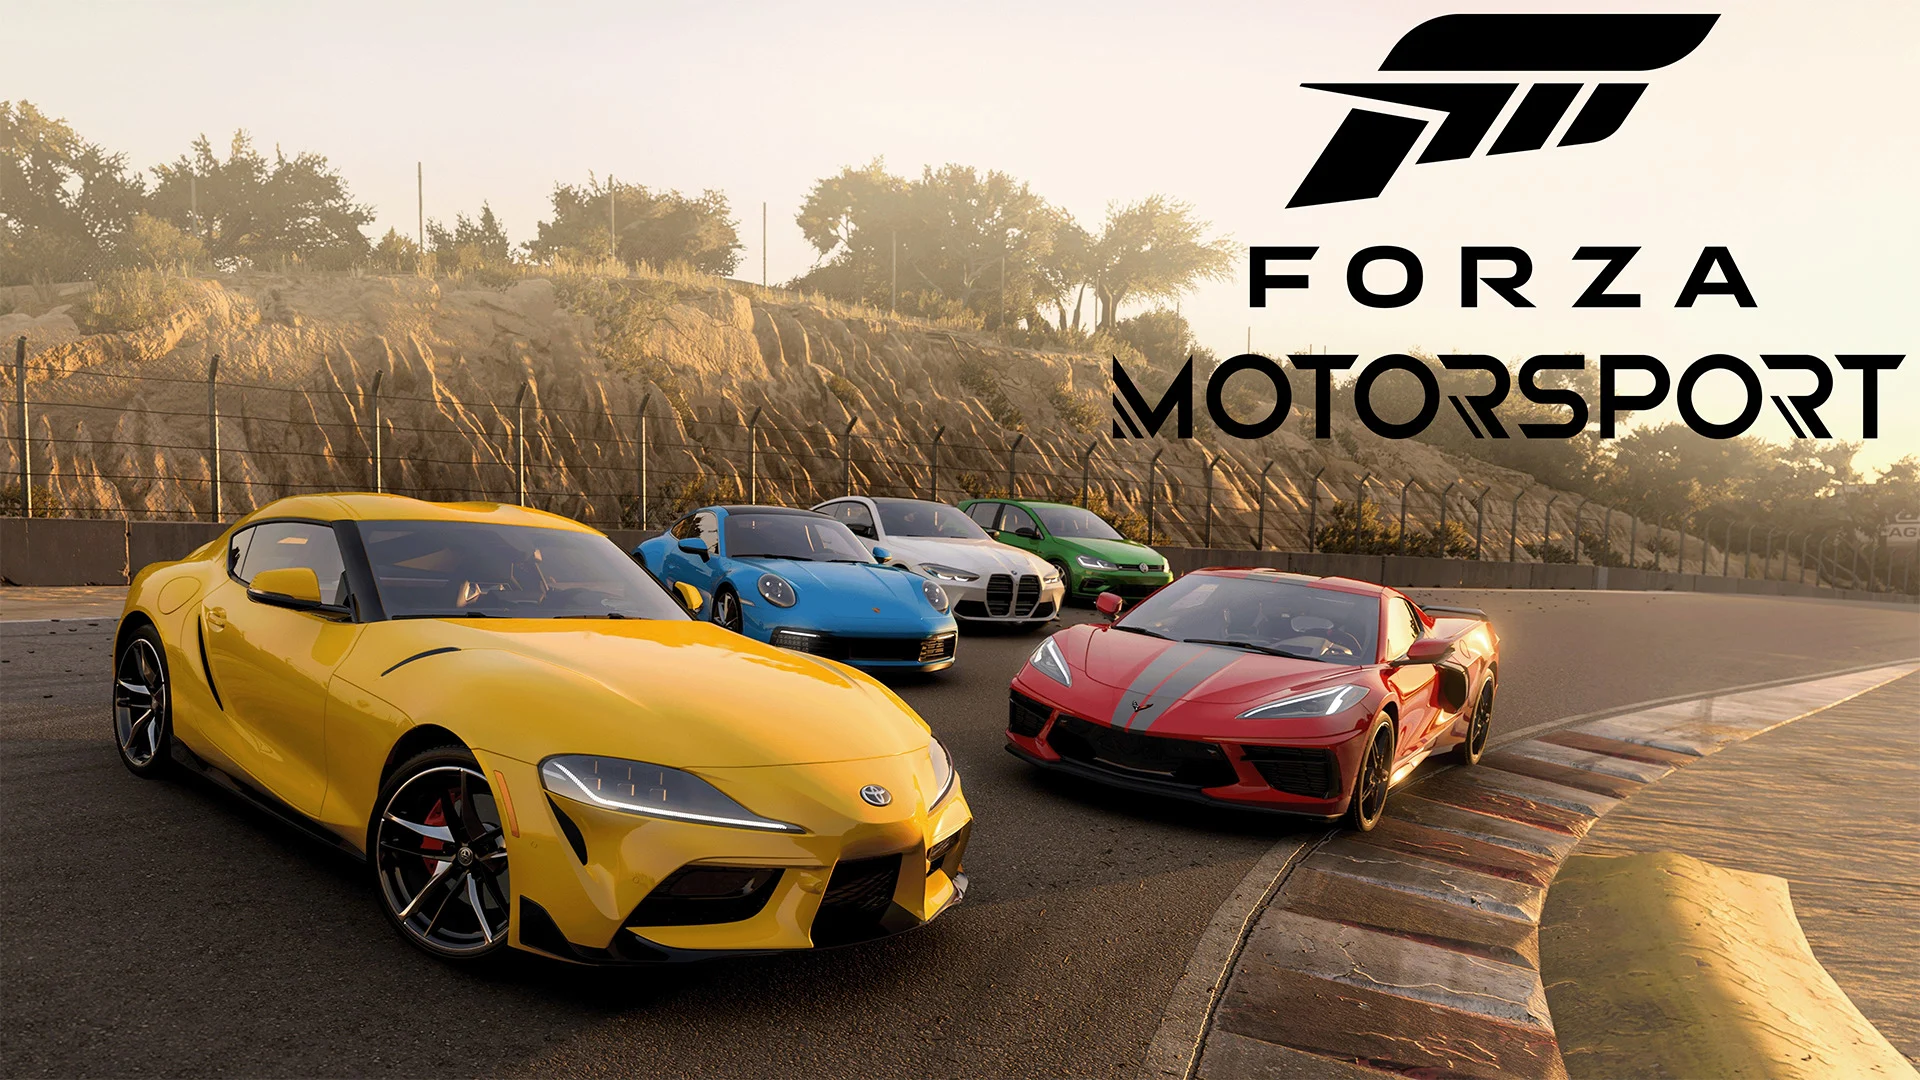 Forza Motorsport update 1.0 with a bunch of bug fixes and gameplay improvements